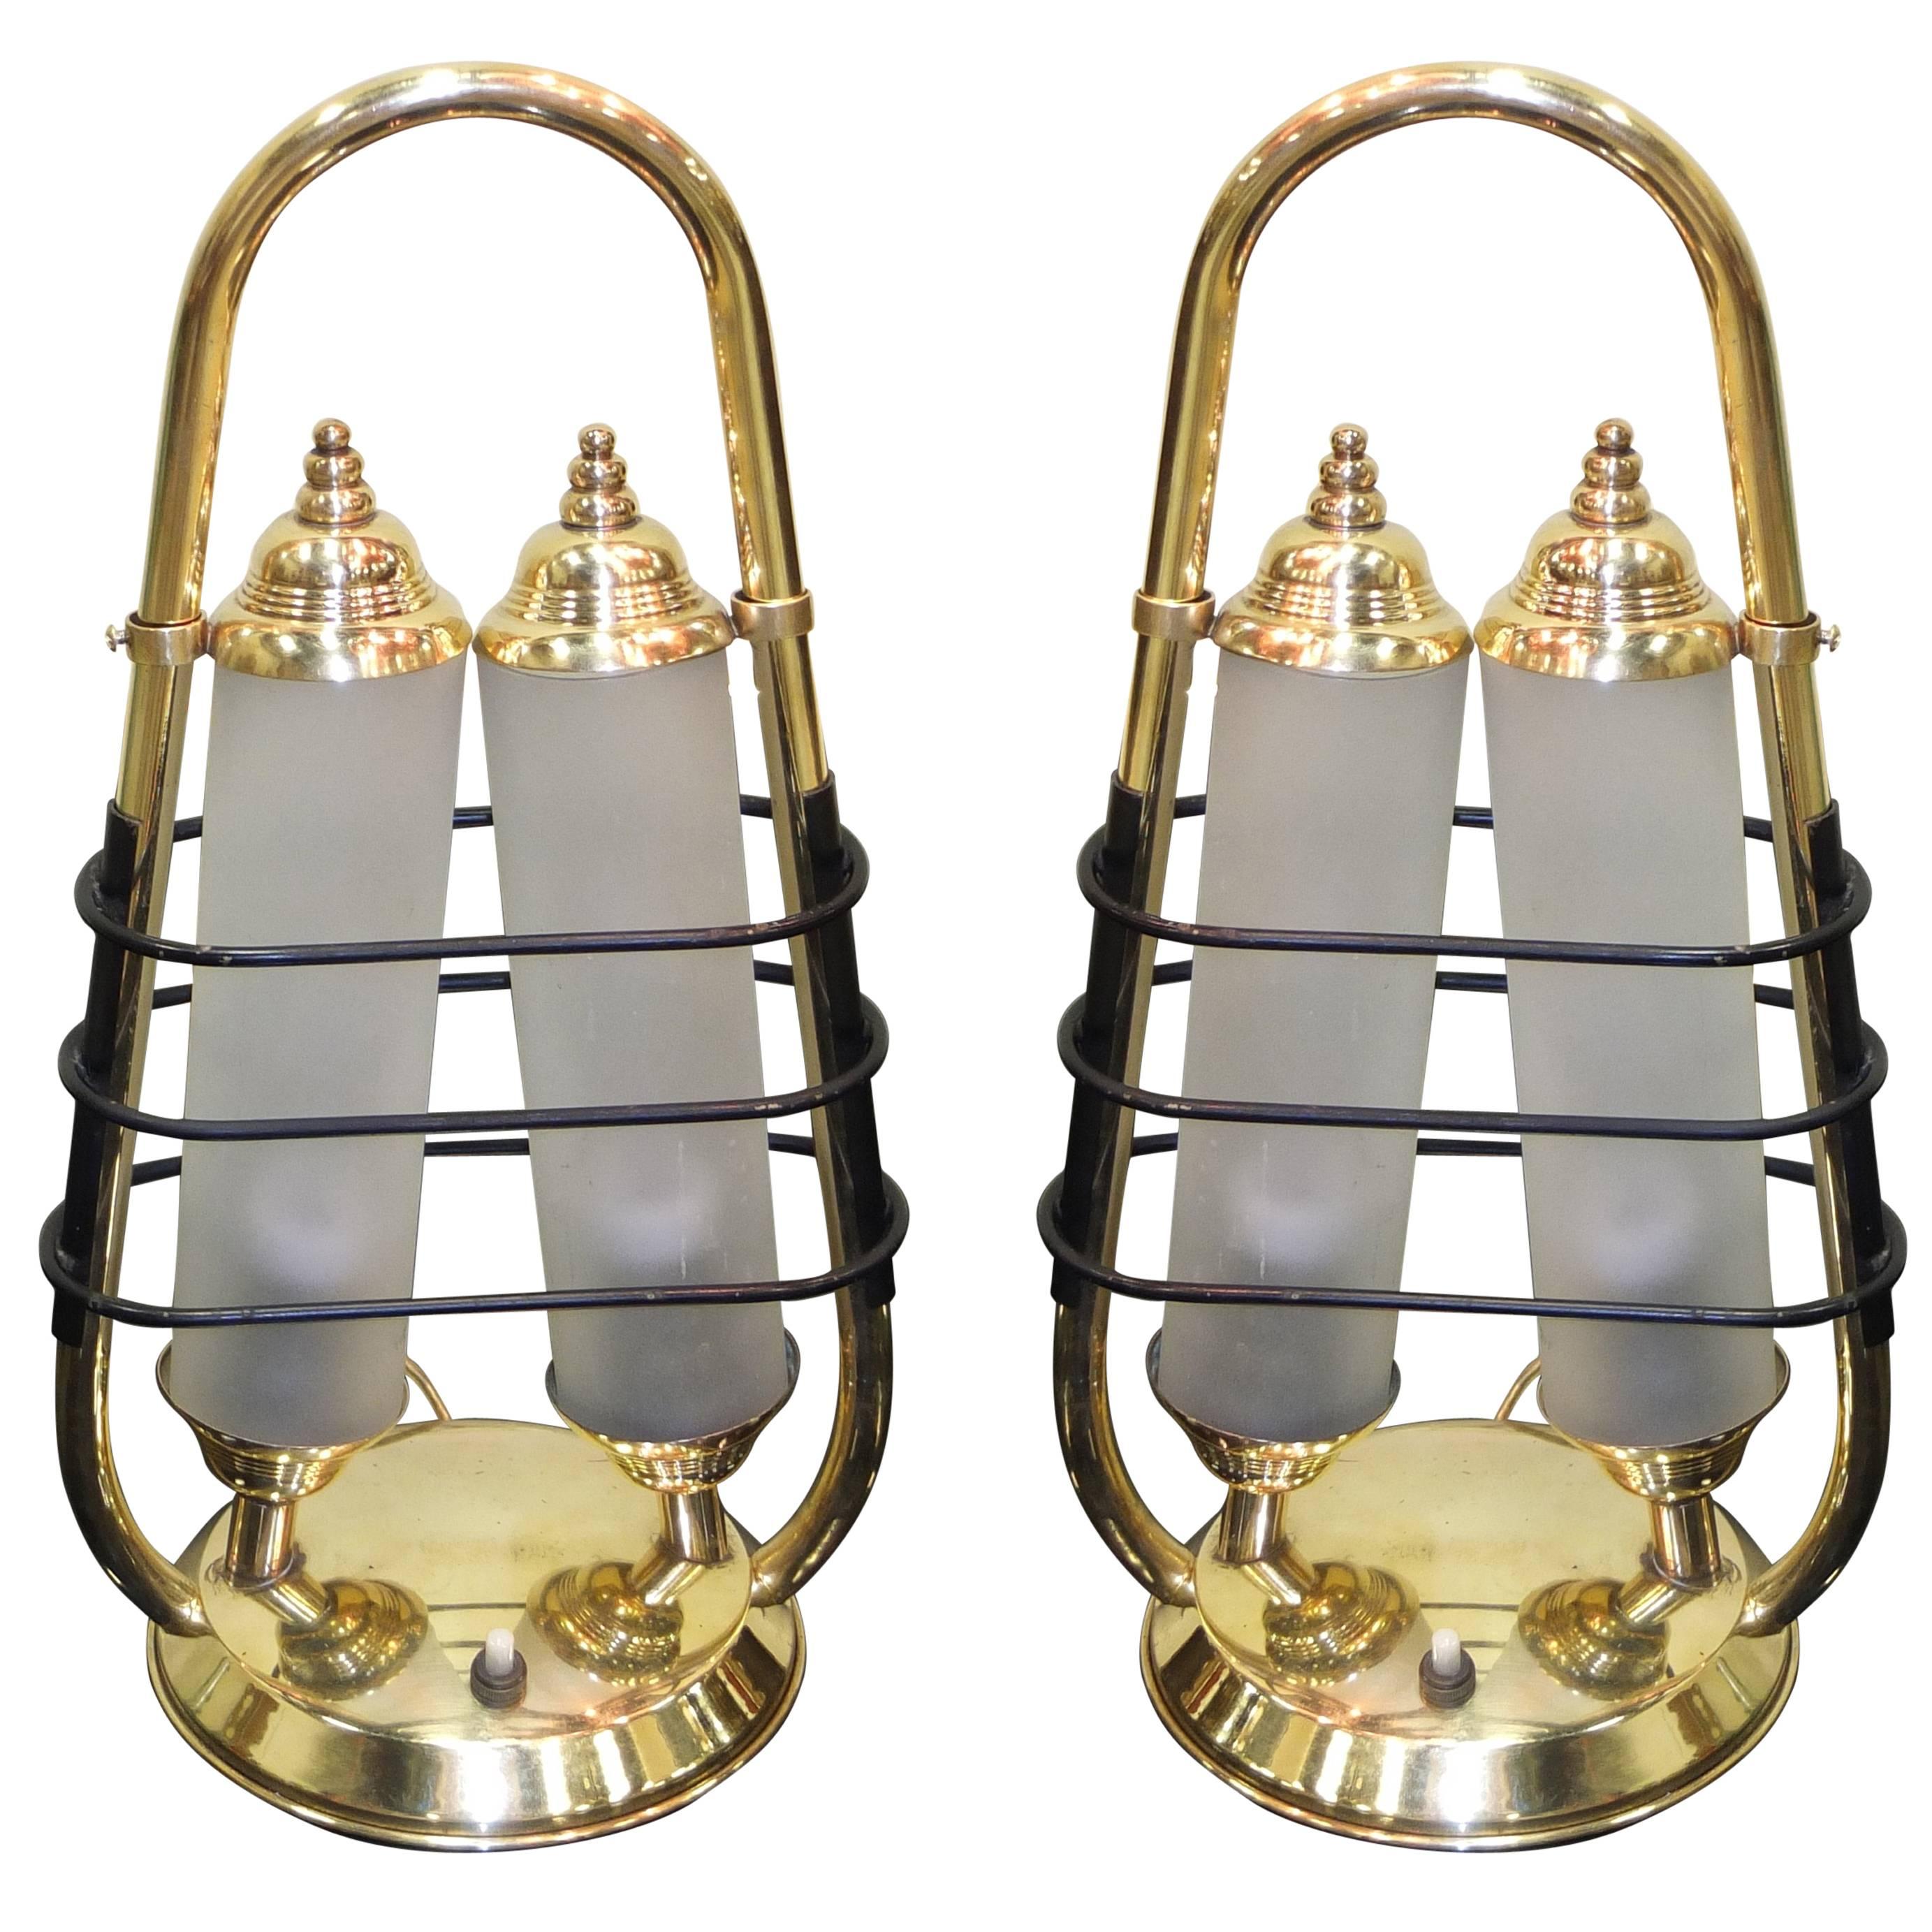 Pair of 1950s Italian Brass Table Lanterns For Sale